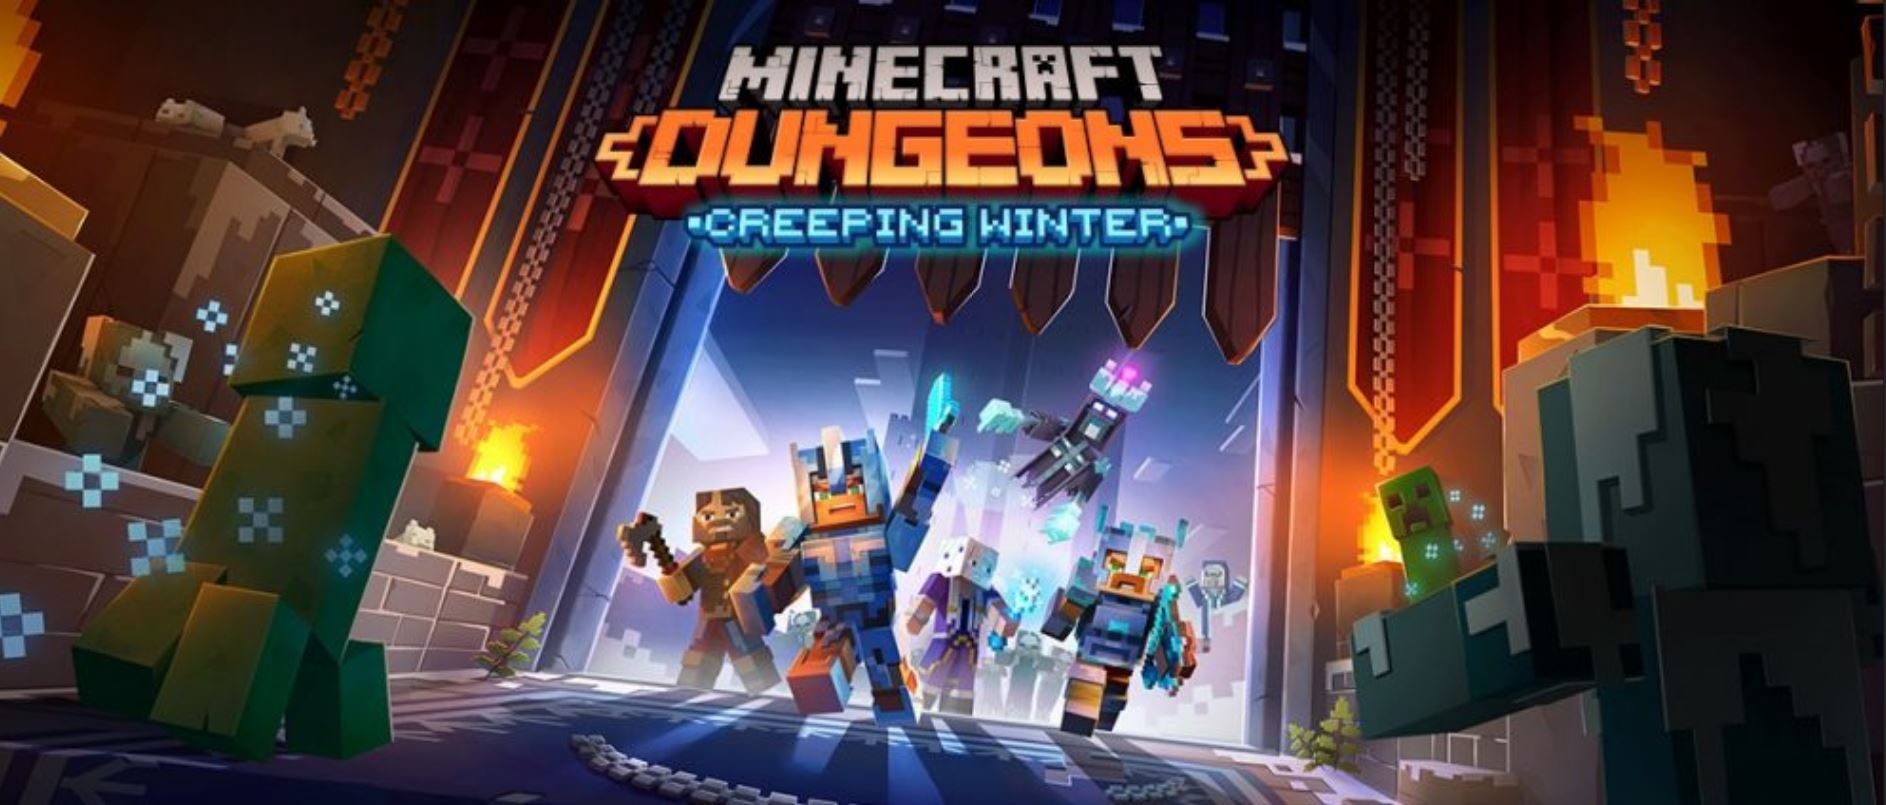 Minecraft Dungeons Is Getting Daily Missions, More Merchants And A New DLC Next Month